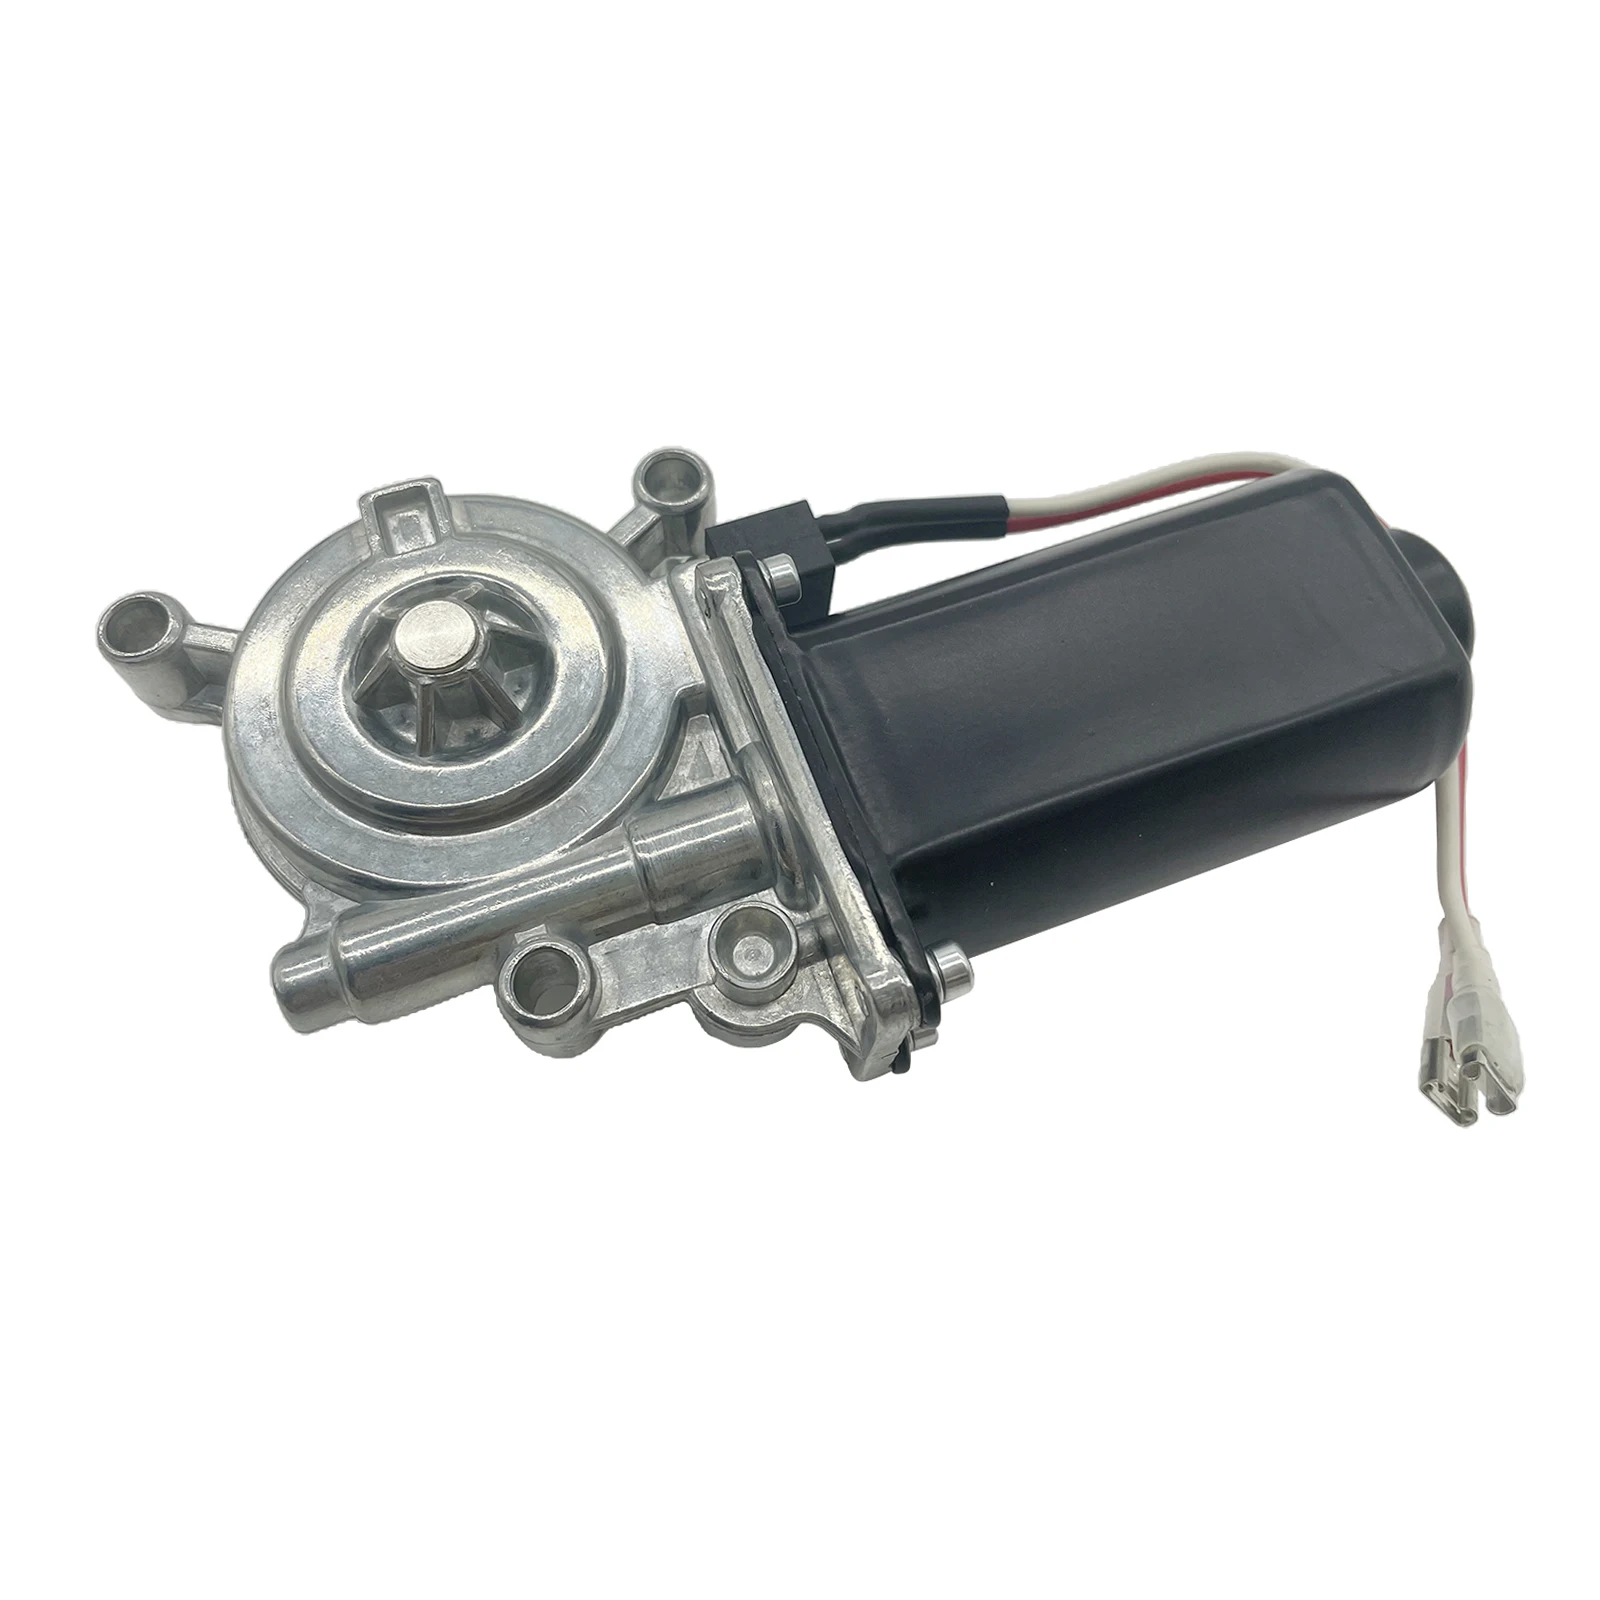 RV Motorhome Trailer Power Awning Replacement Motor Assembly 12-Volt DC 75-RPM Compatible with Lippert 266149 373566